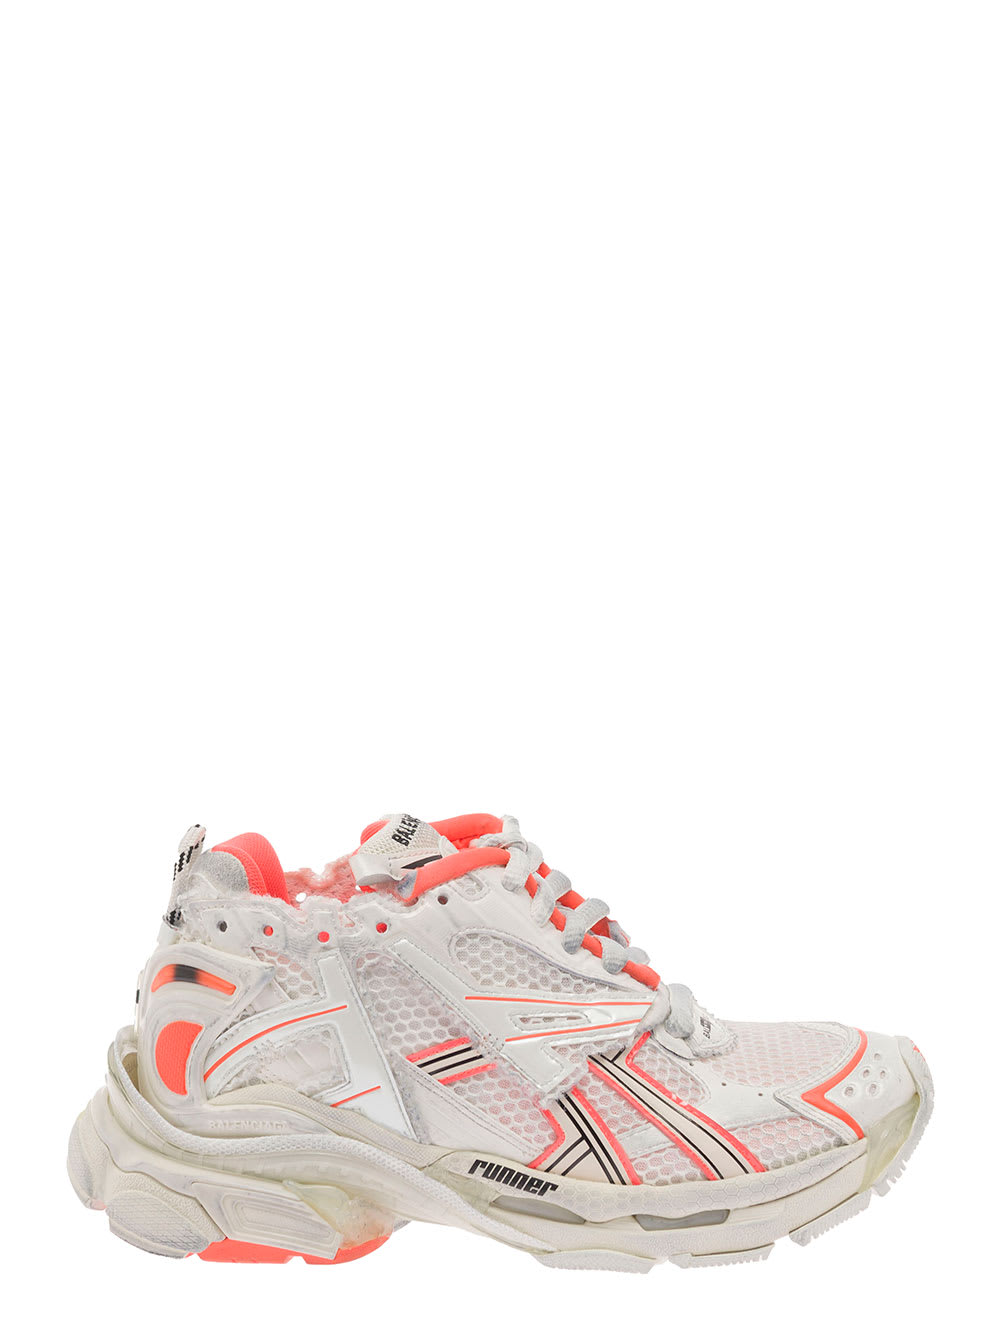 Balenciaga Multicolor Runner Sneakers With Reflective Details In A Mix Of Materials Woman